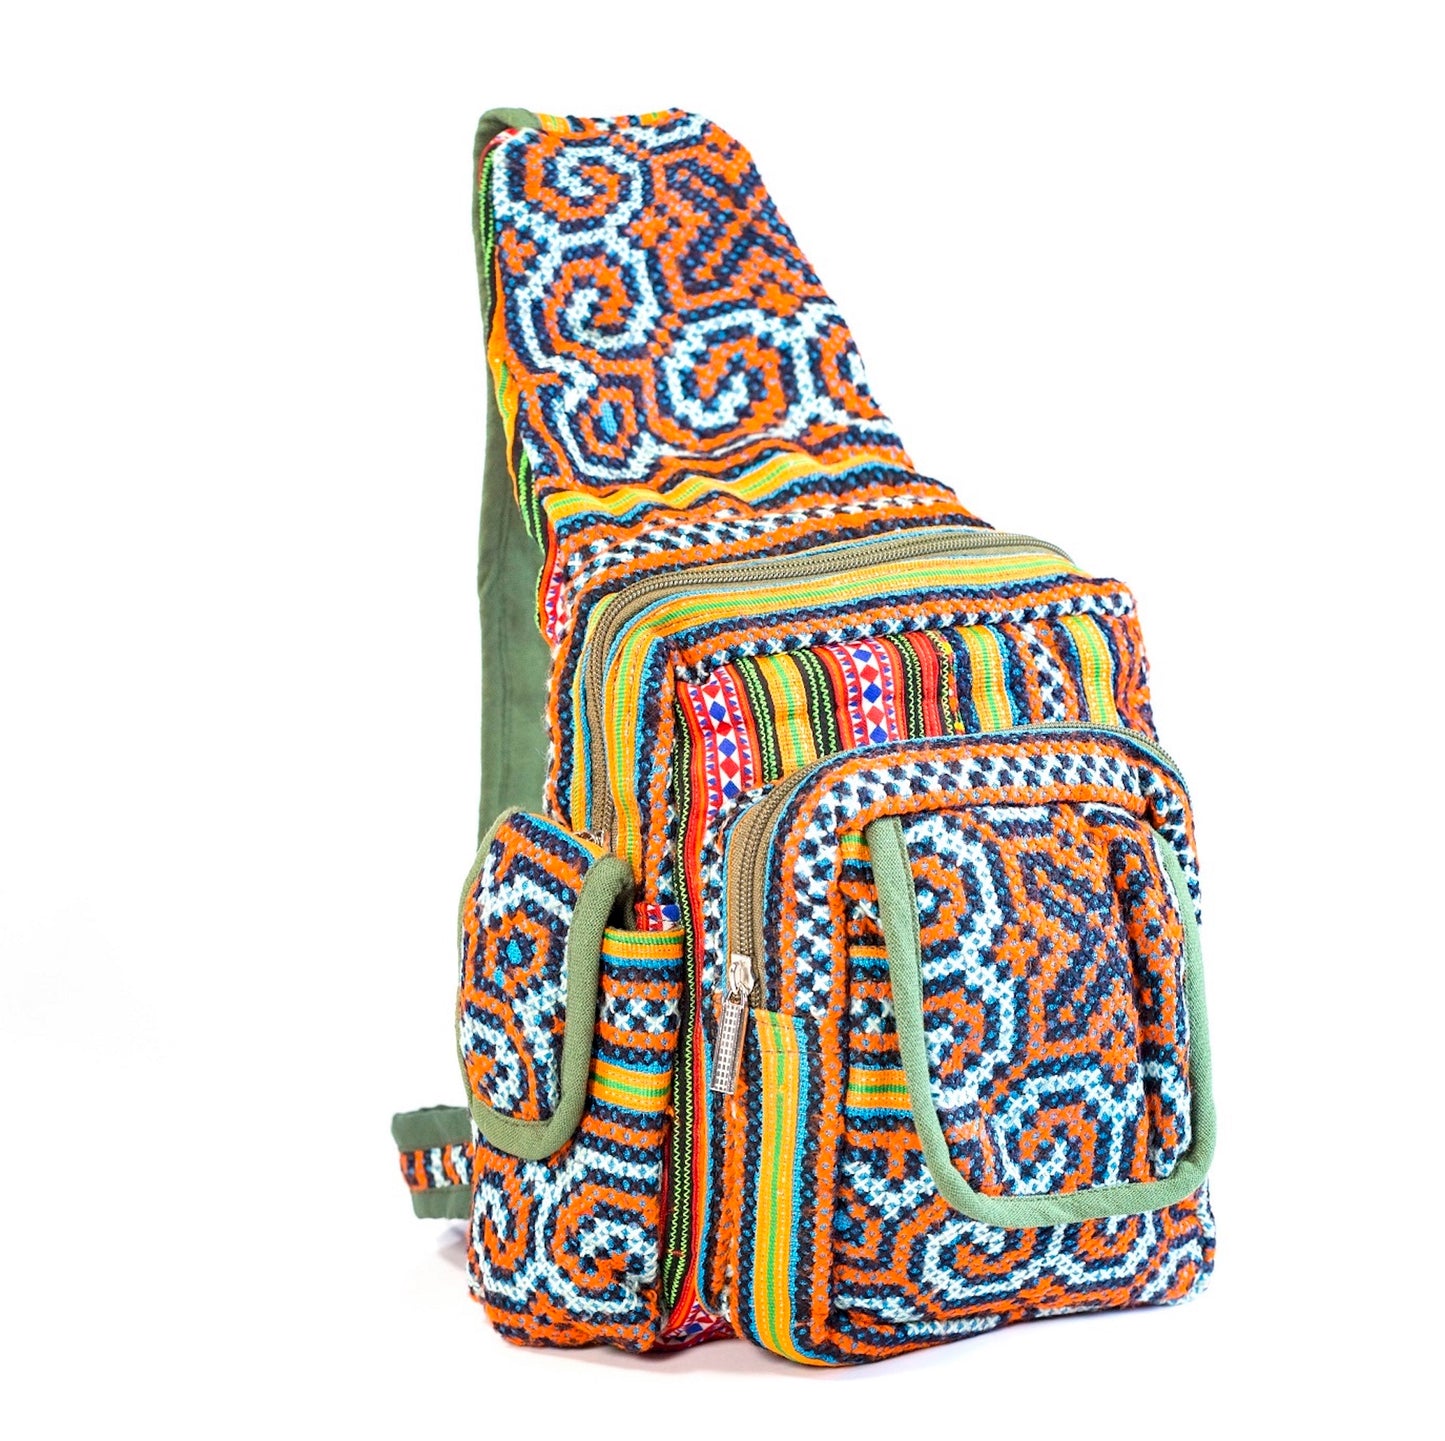 Boho-style linen, embroidery Sling bag, H'mong tribal pattern in bright BLUE silk thread